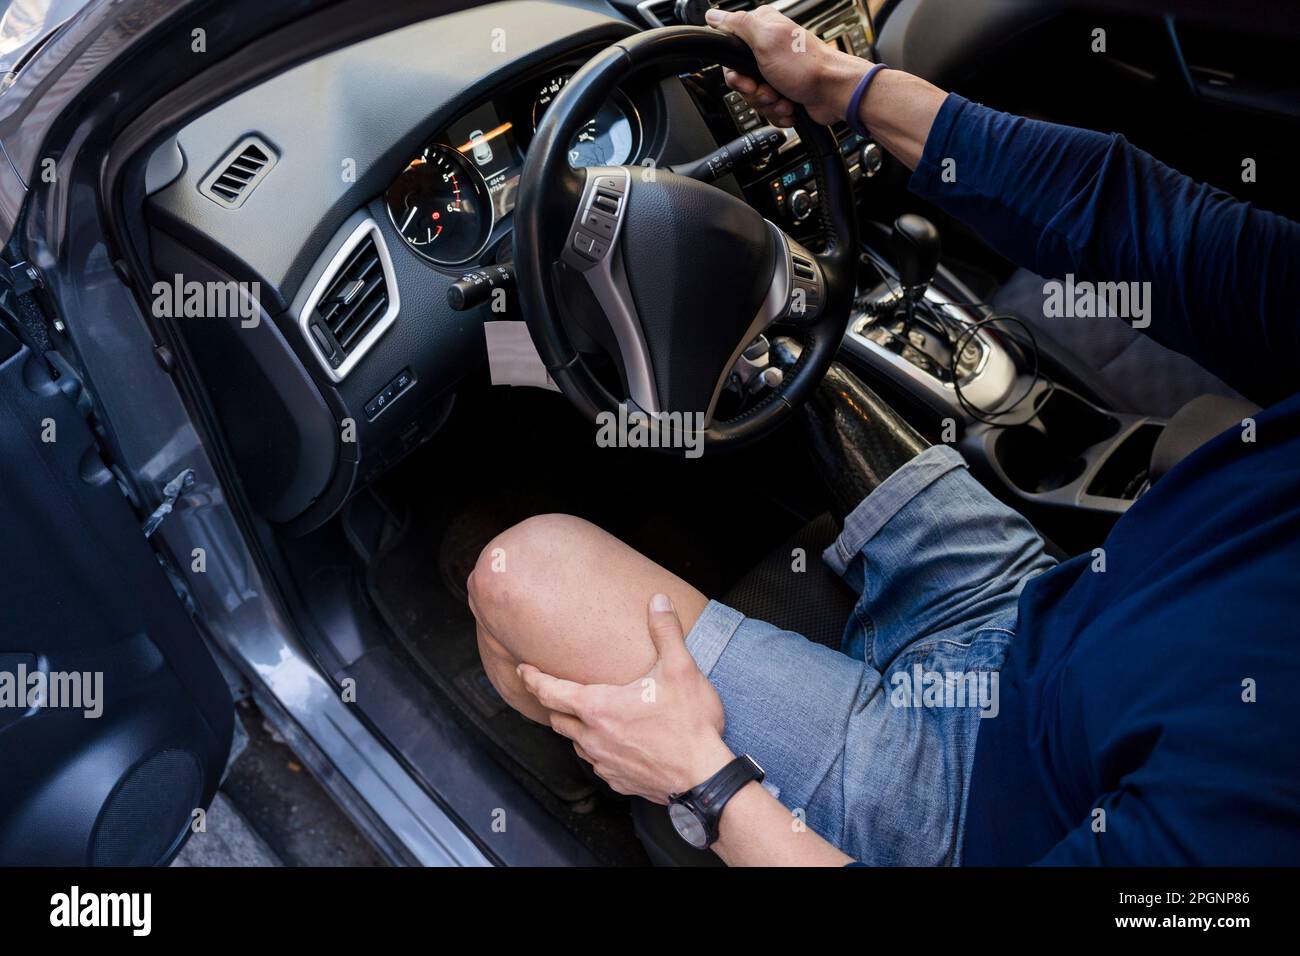 Man with disability holding steering wheel of car Stock Photo